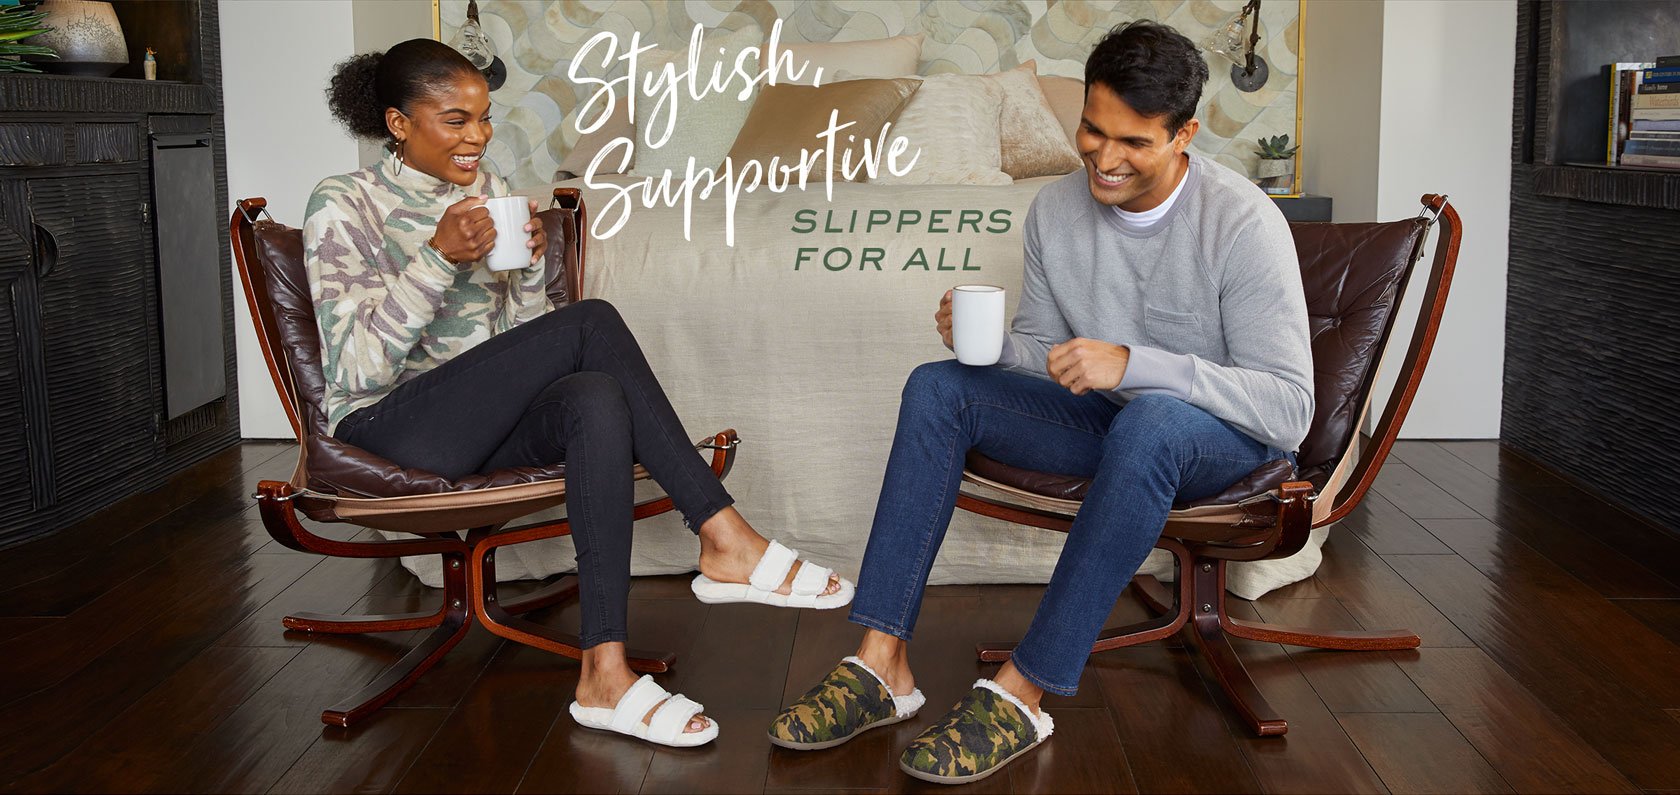 Stylish, Supportive Slippers for All